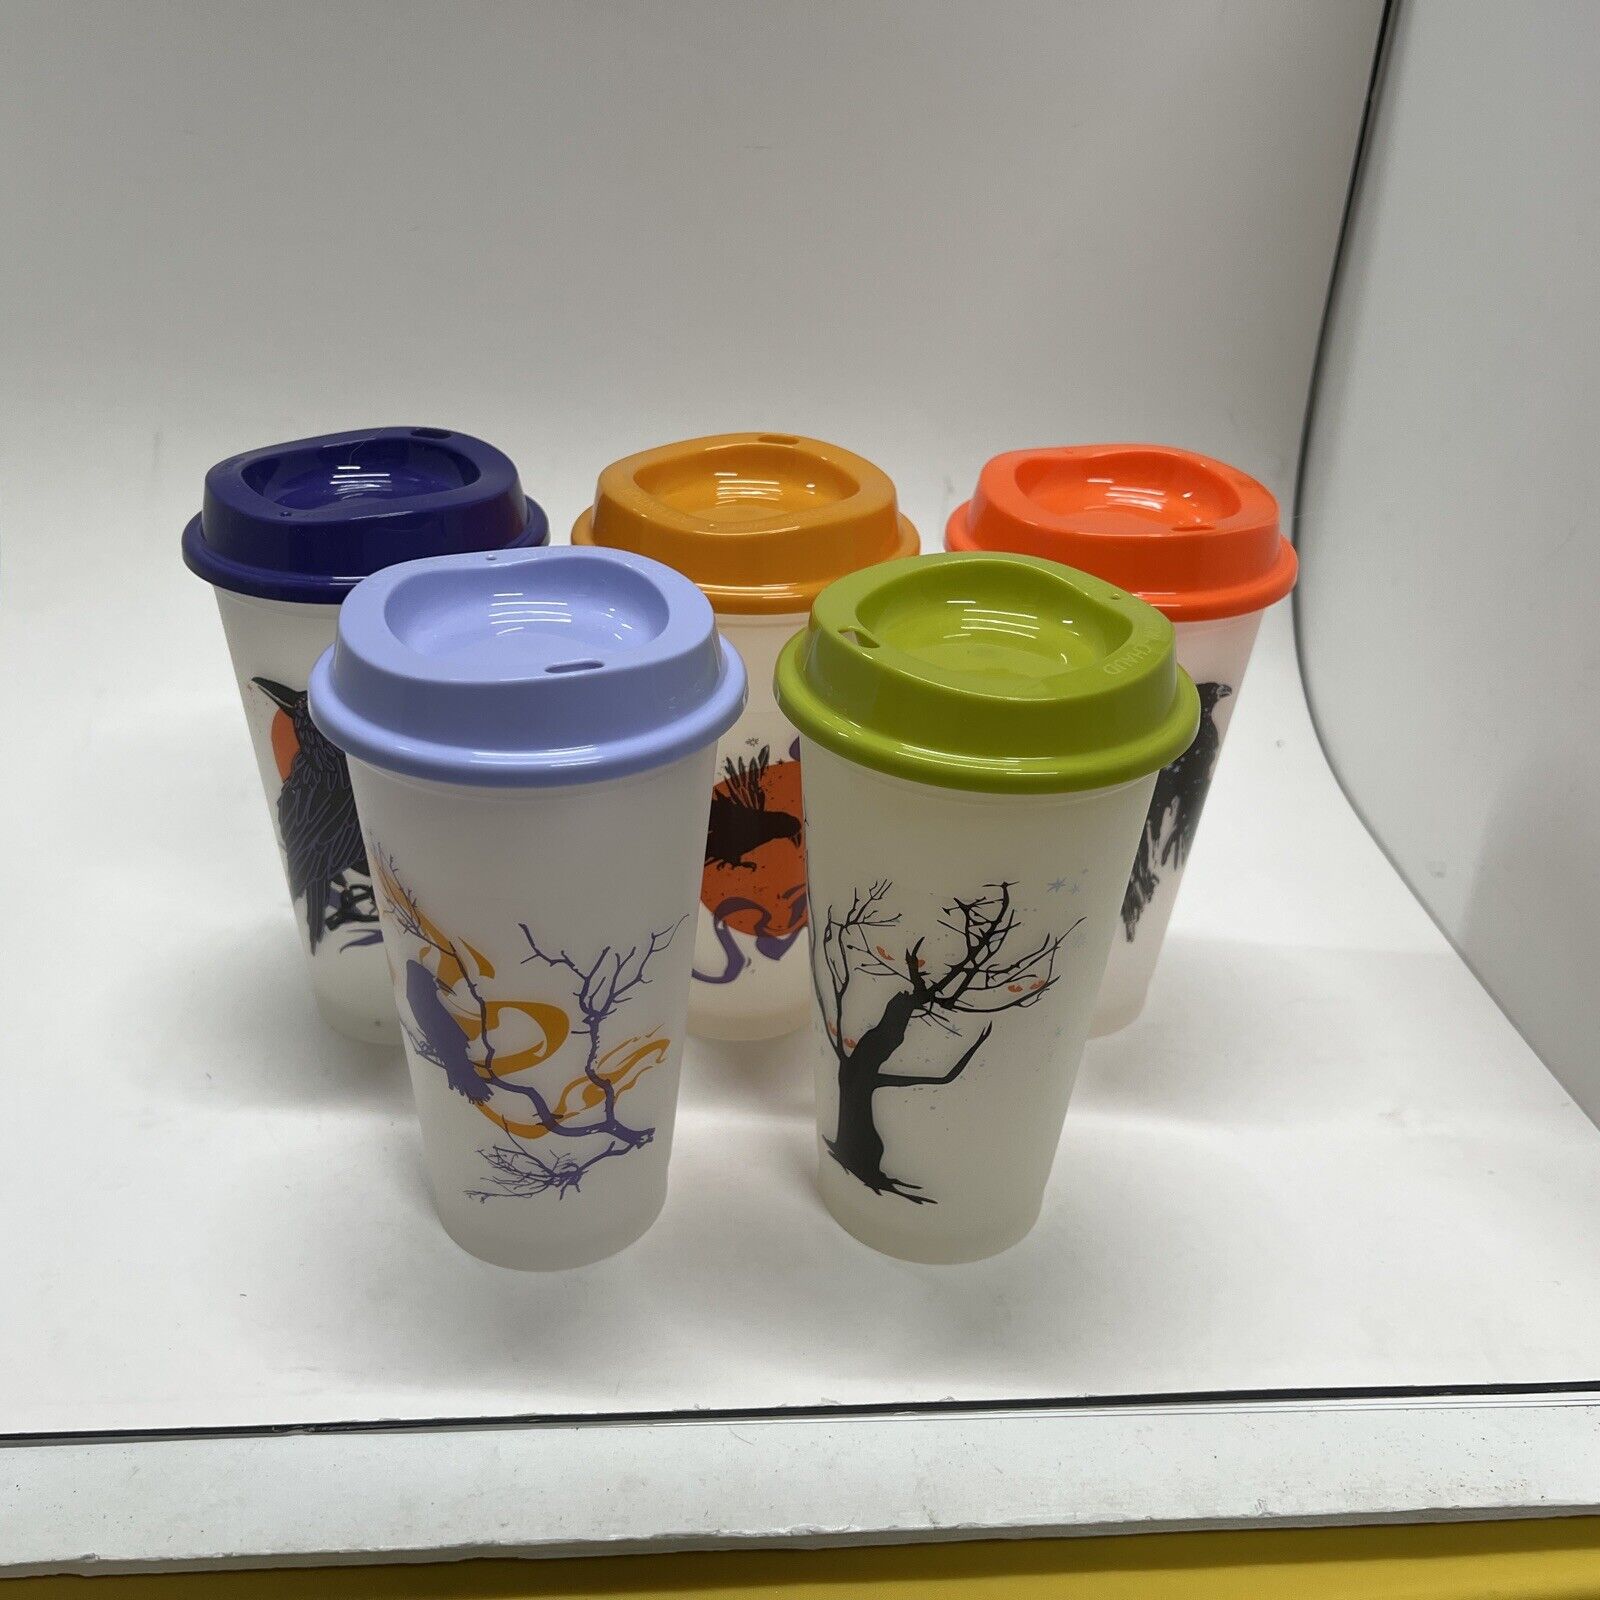 Preowned Lot of 5 Starbucks Halloween Drink Cups